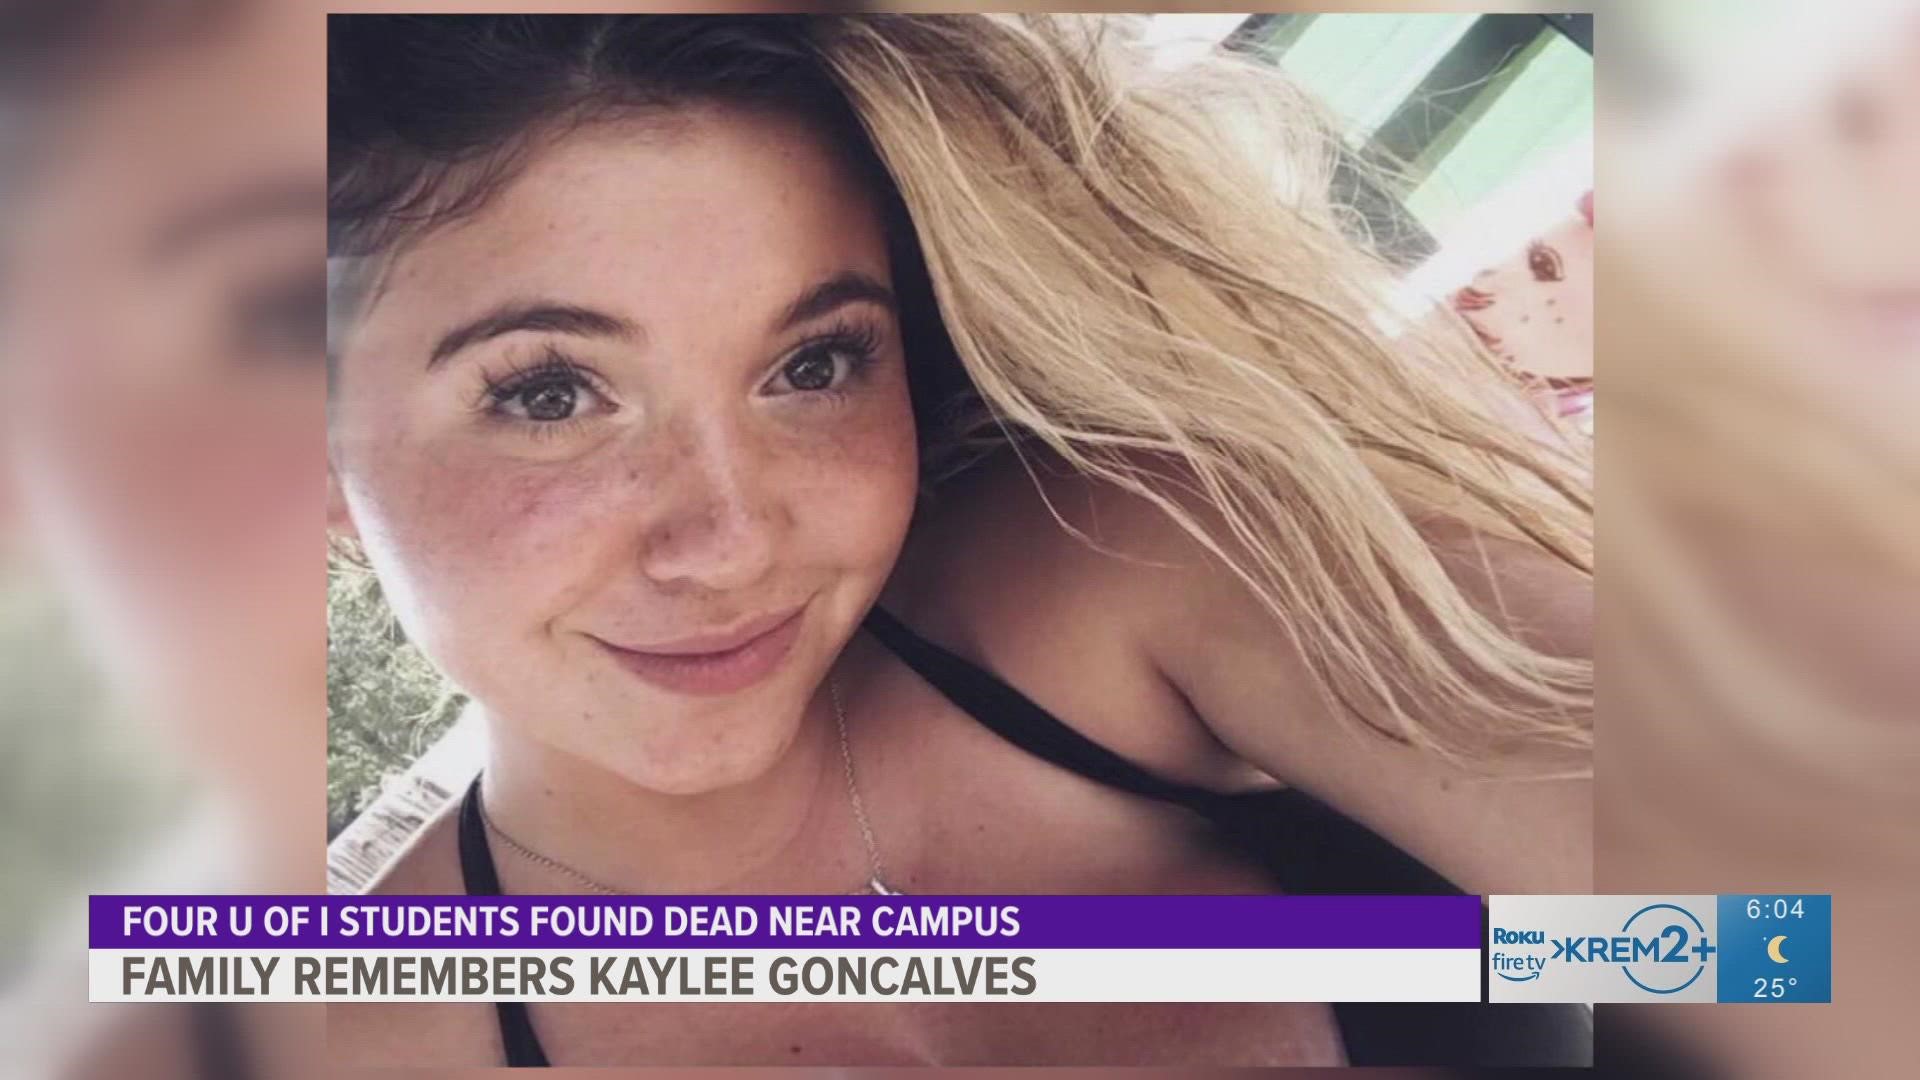 Kaylee Goncalves was one of the four victims Moscow Police found dead in a home near the University of Idaho's campus Sunday.